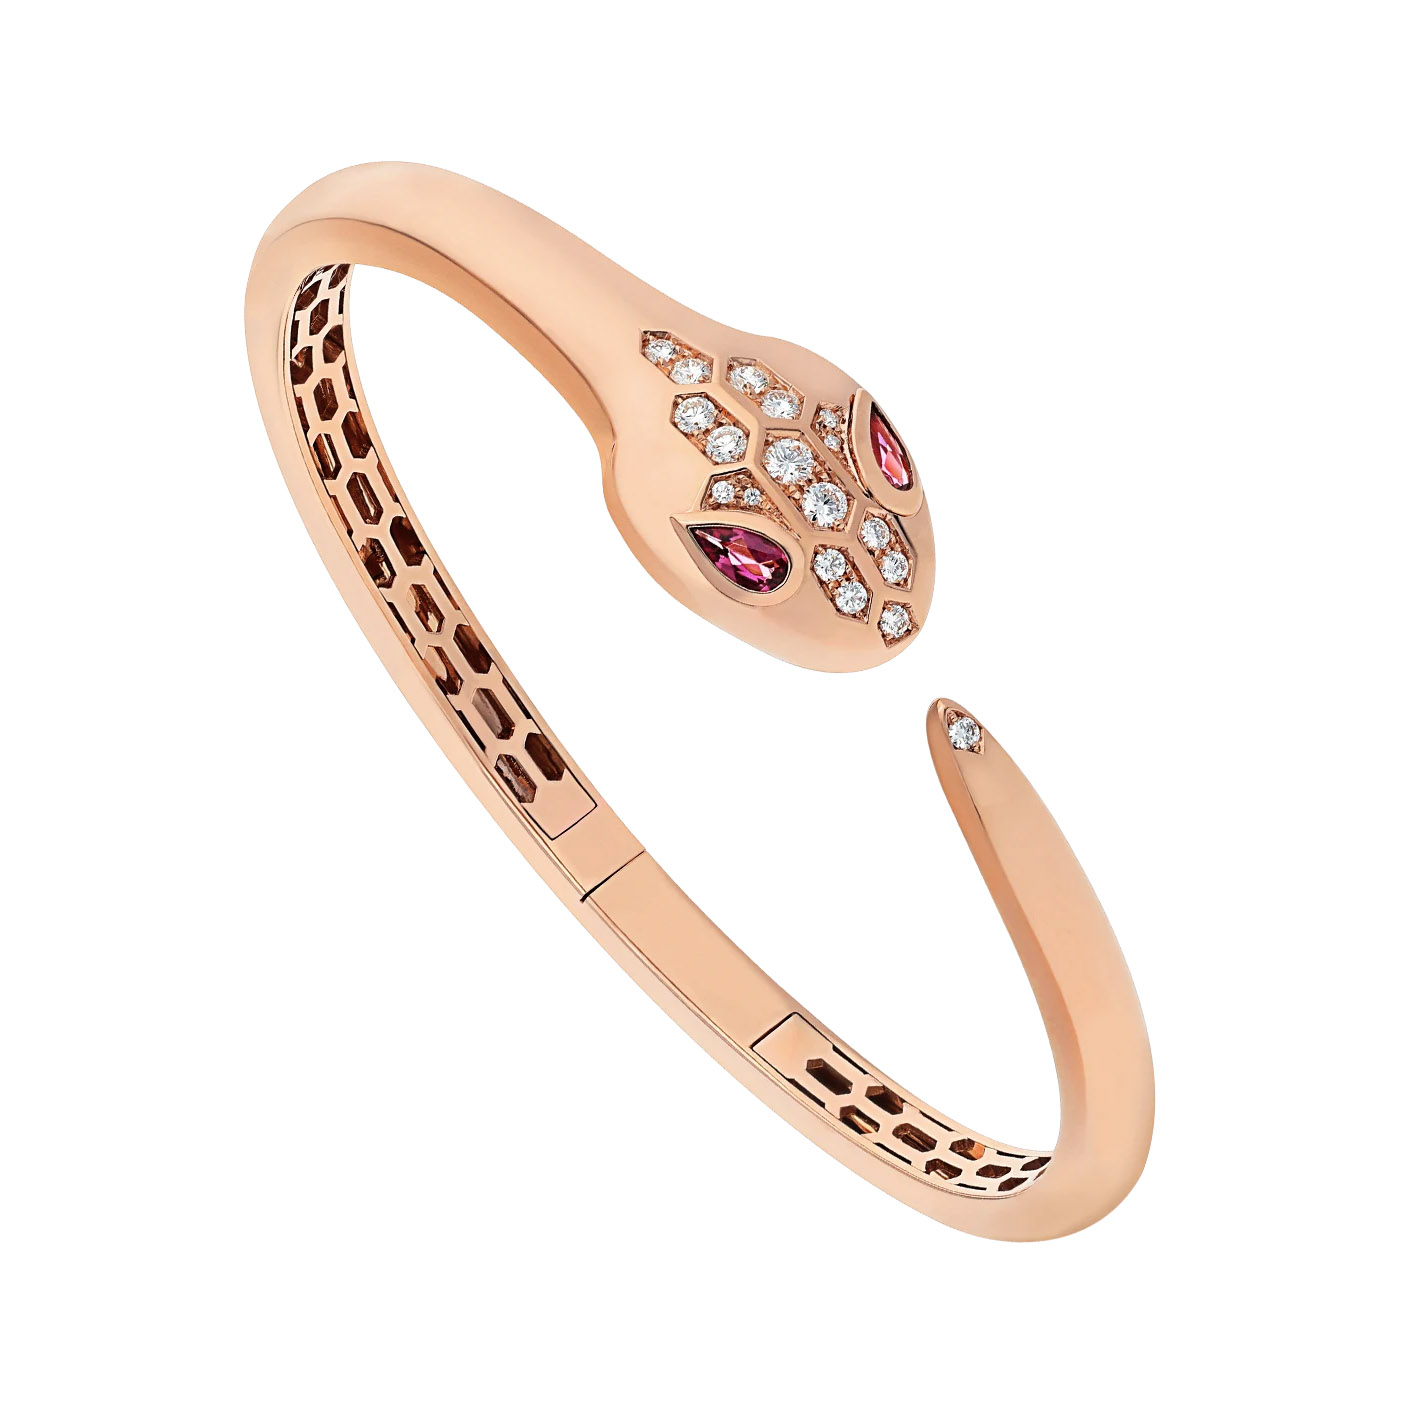 Wholesale Custom design bracelet in 18 kt OEM/ODM Jewelry rose gold, set with rubellite eyes and demi-pavé diamonds on the head and the tail OEM Jewelry Manufacturer